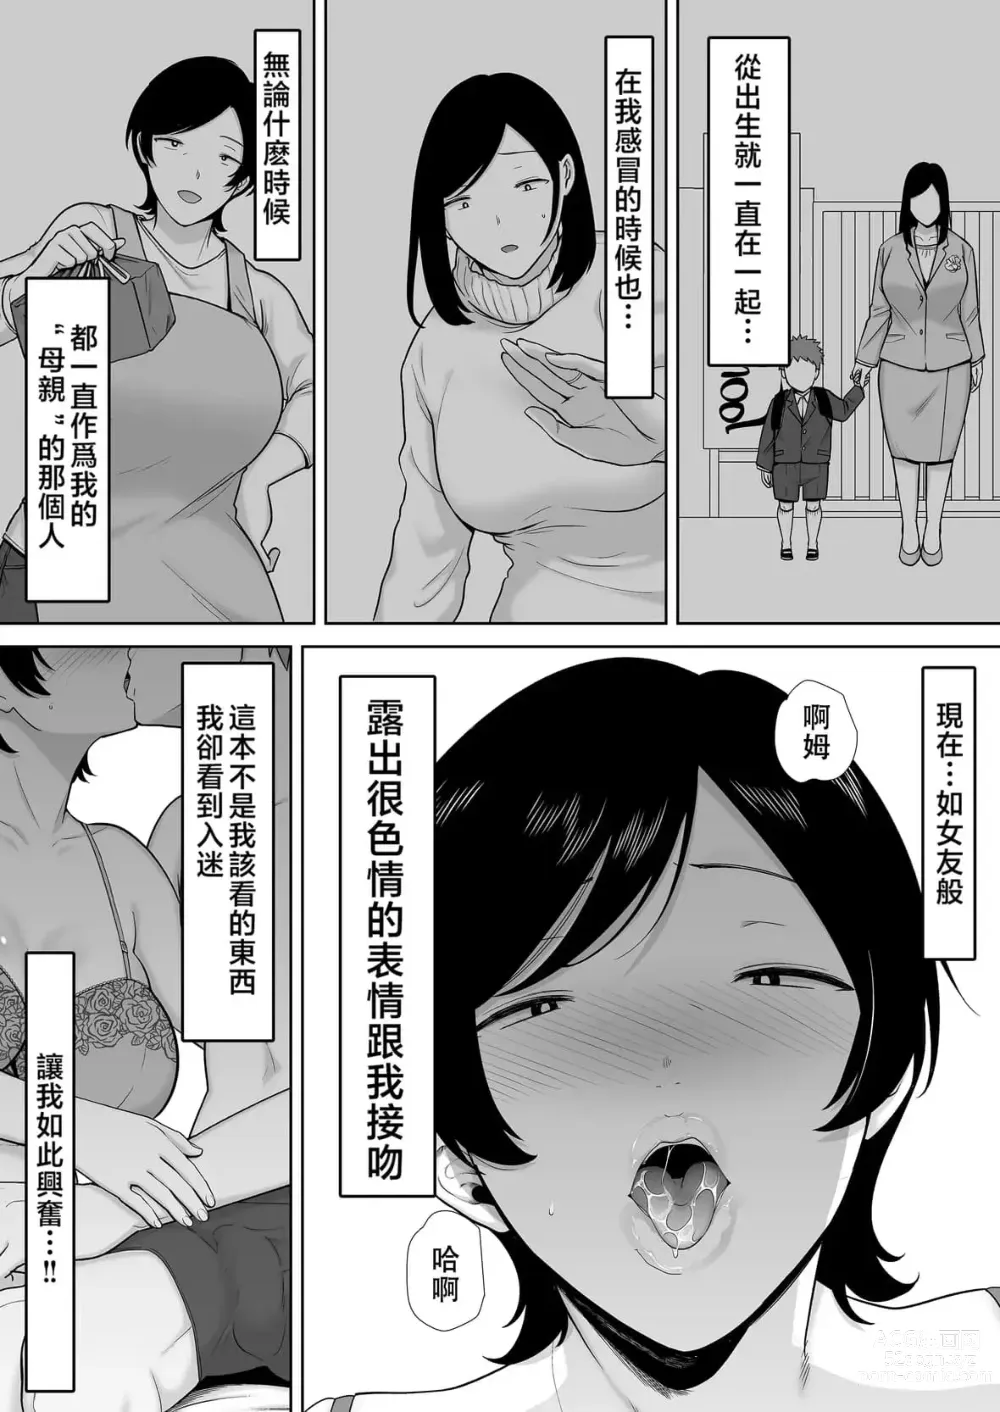 Page 25 of doujinshi even mom want a litle lovin